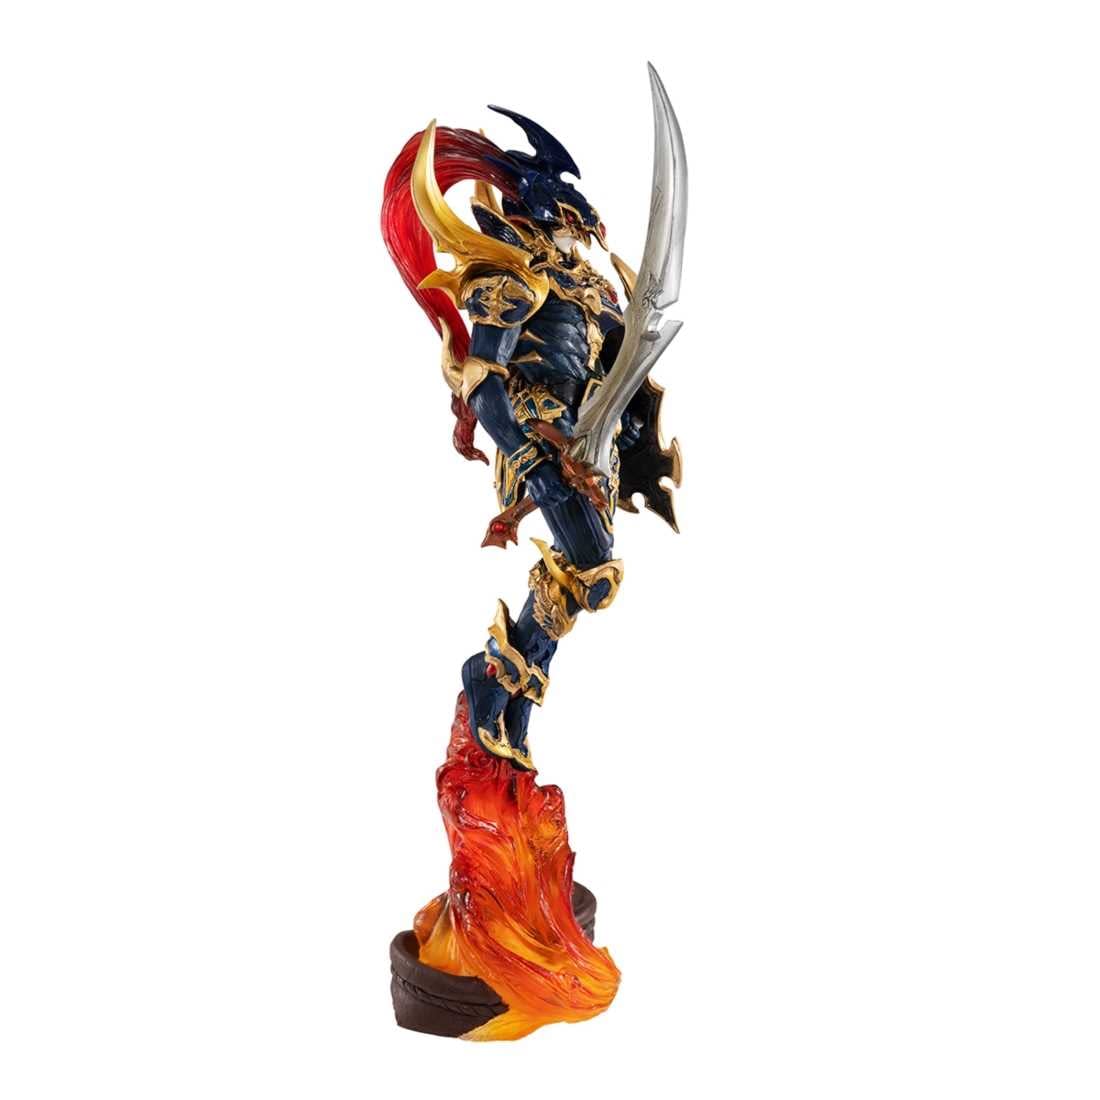 Yu Gi Oh Chaos Soldier Levels the Playing Field with Megahouse